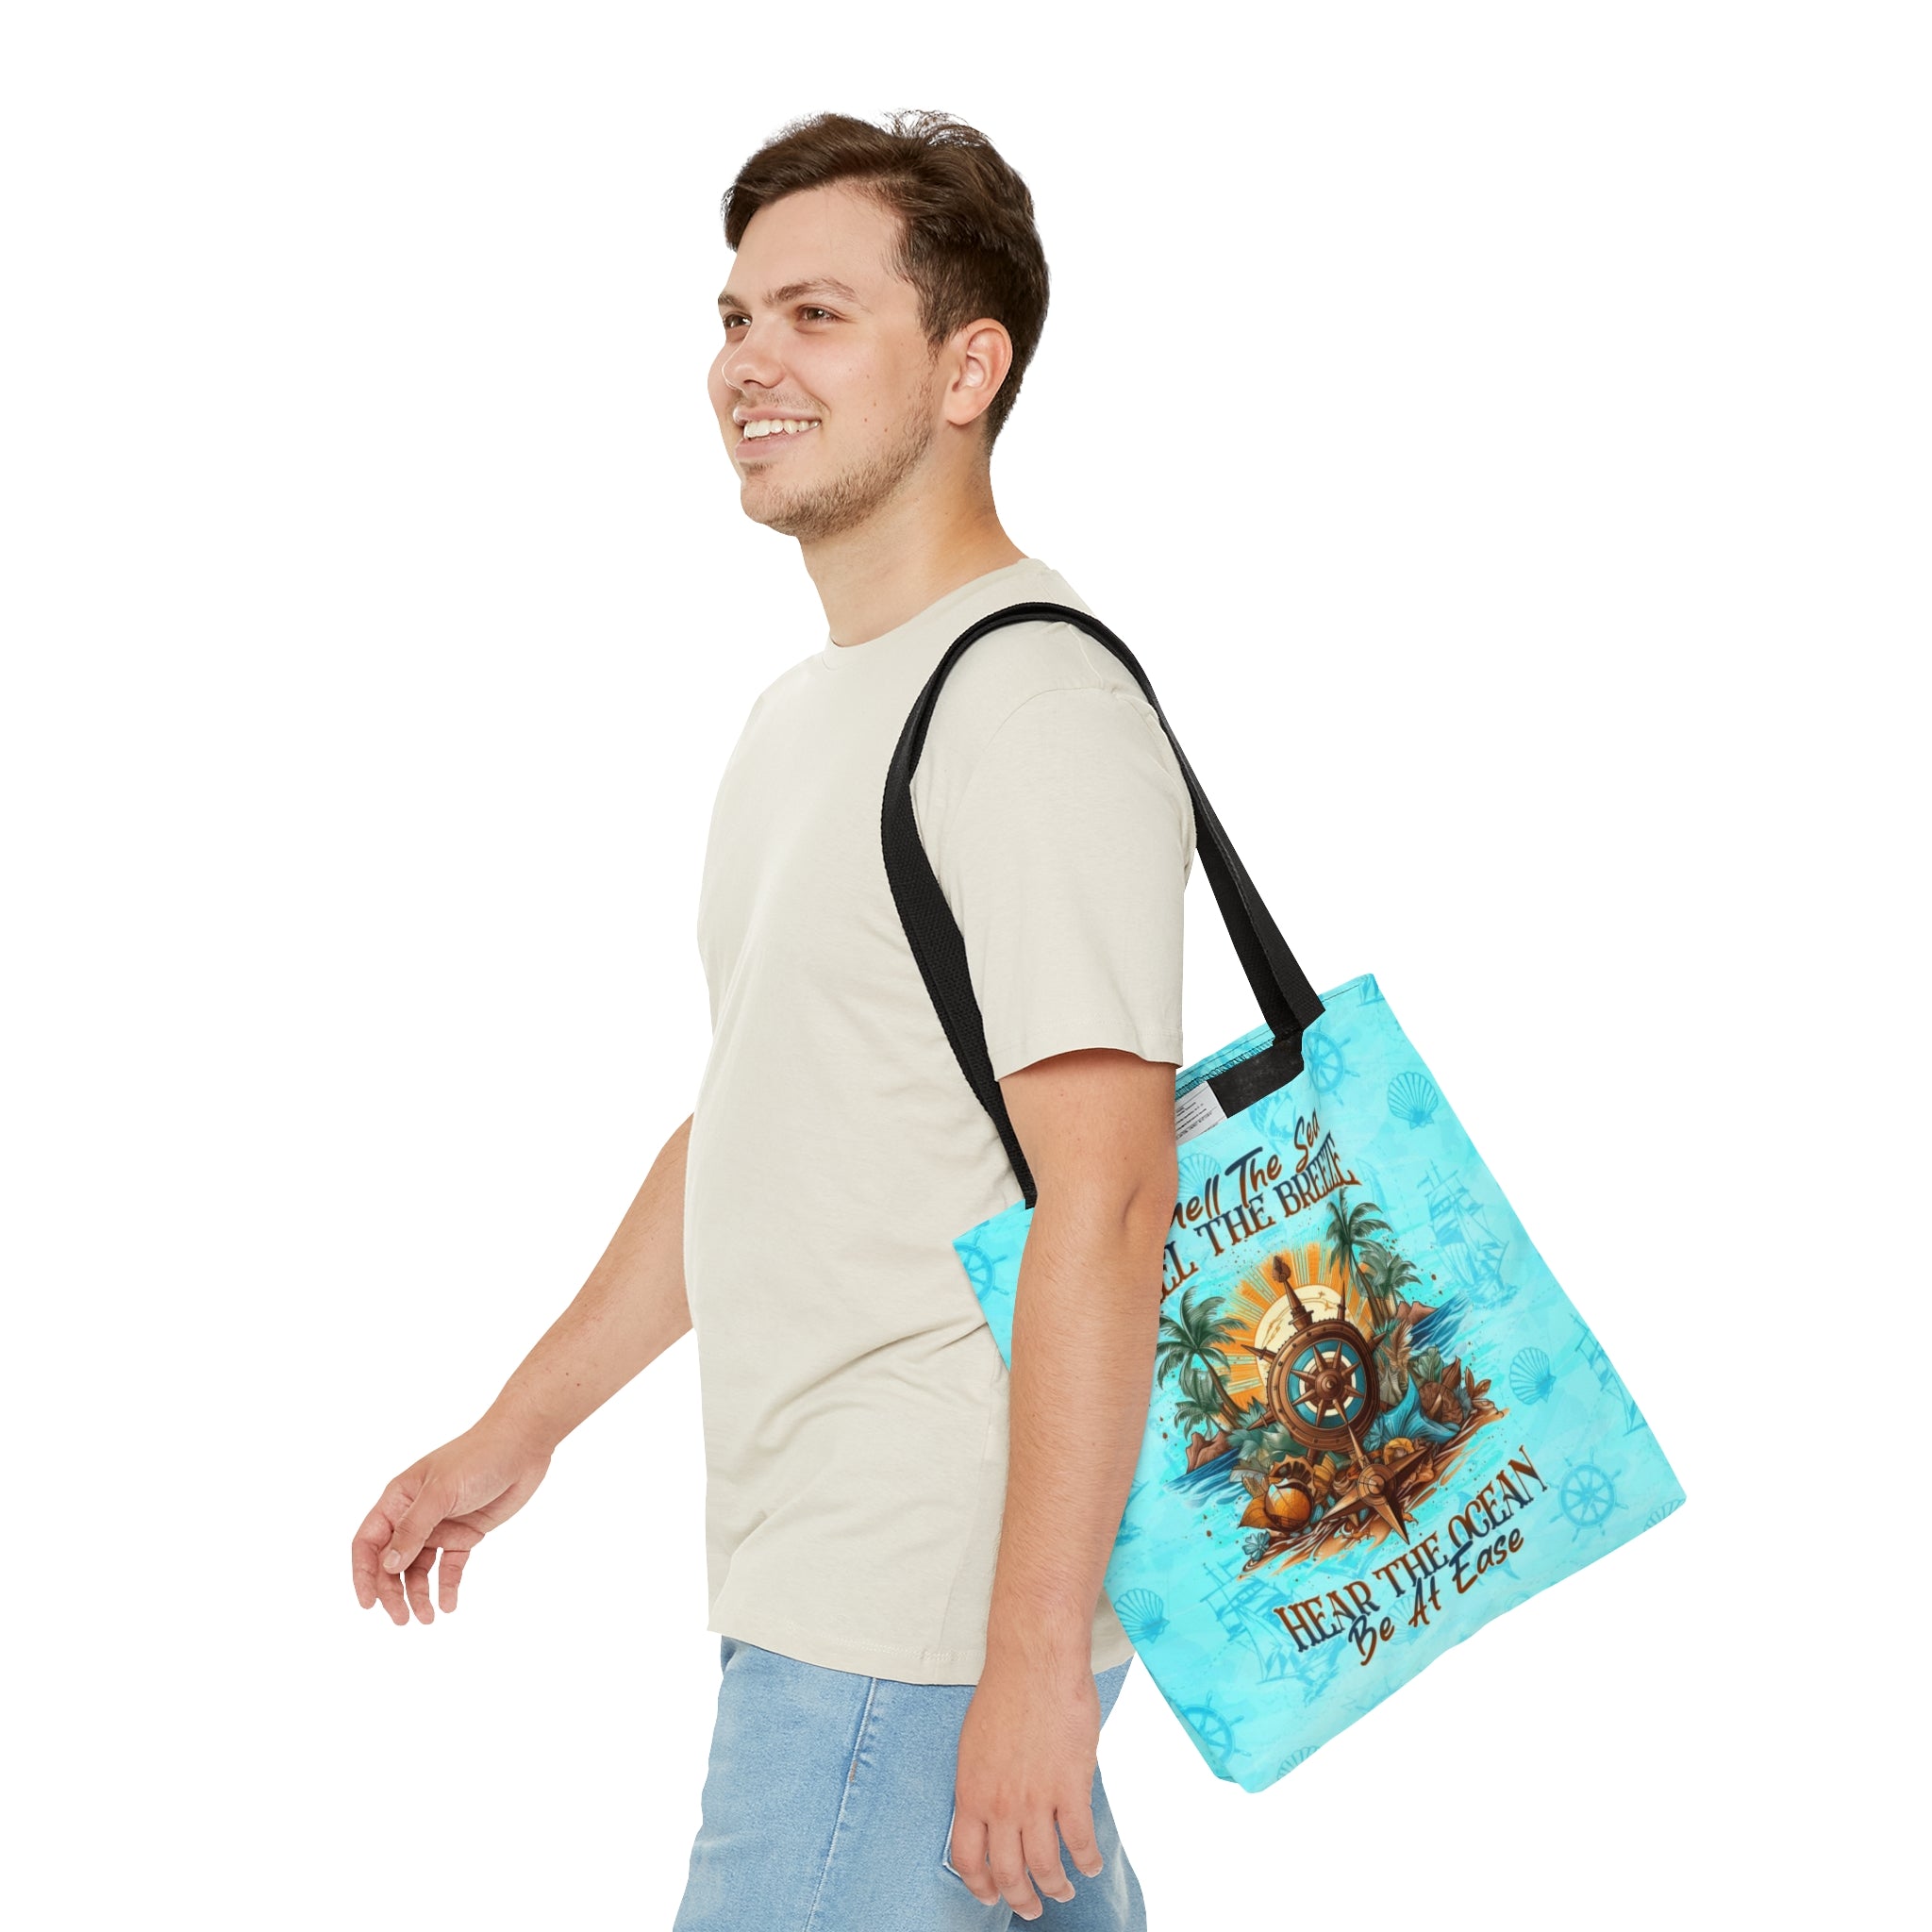 SMELL THE SEA FEEL THE BREEZE TOTE BAG - YHLN0906239